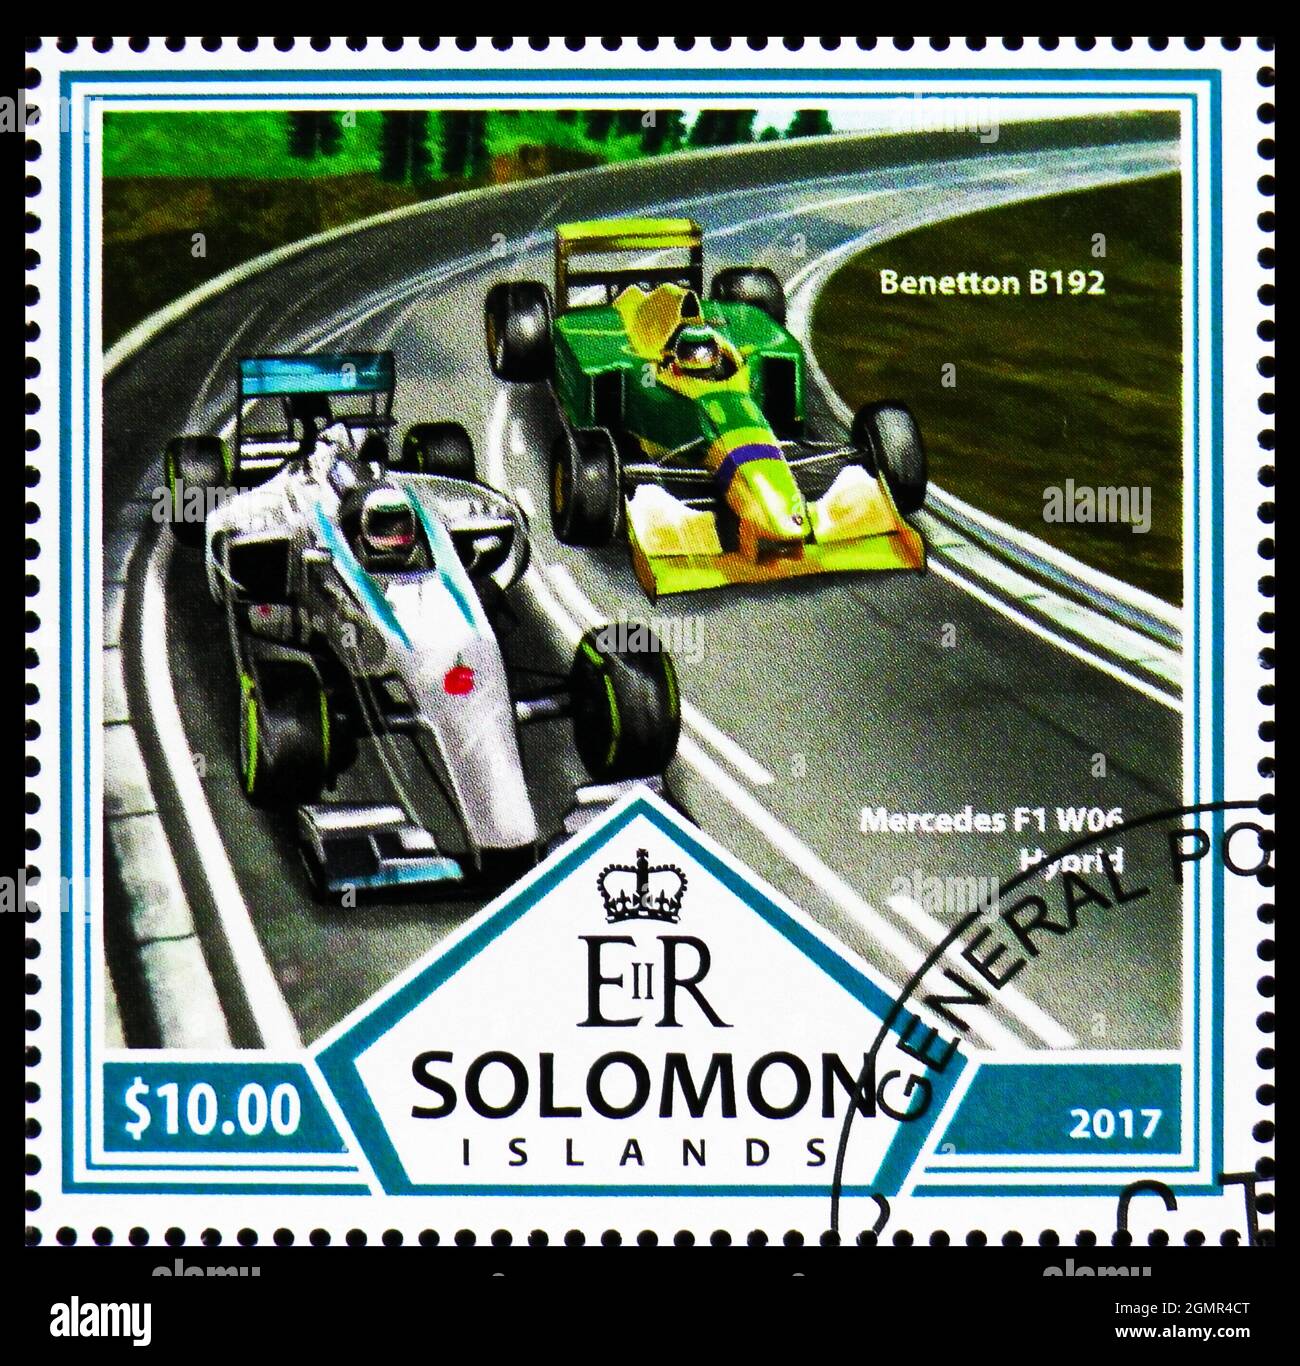 MOSCOW, RUSSIA - JULY 31, 2021: Postage stamp printed on Solomon Islands shows Benetton B192 and Mercedes F1 W06 Hybrid, Formula I serie, circa 2017 Stock Photo